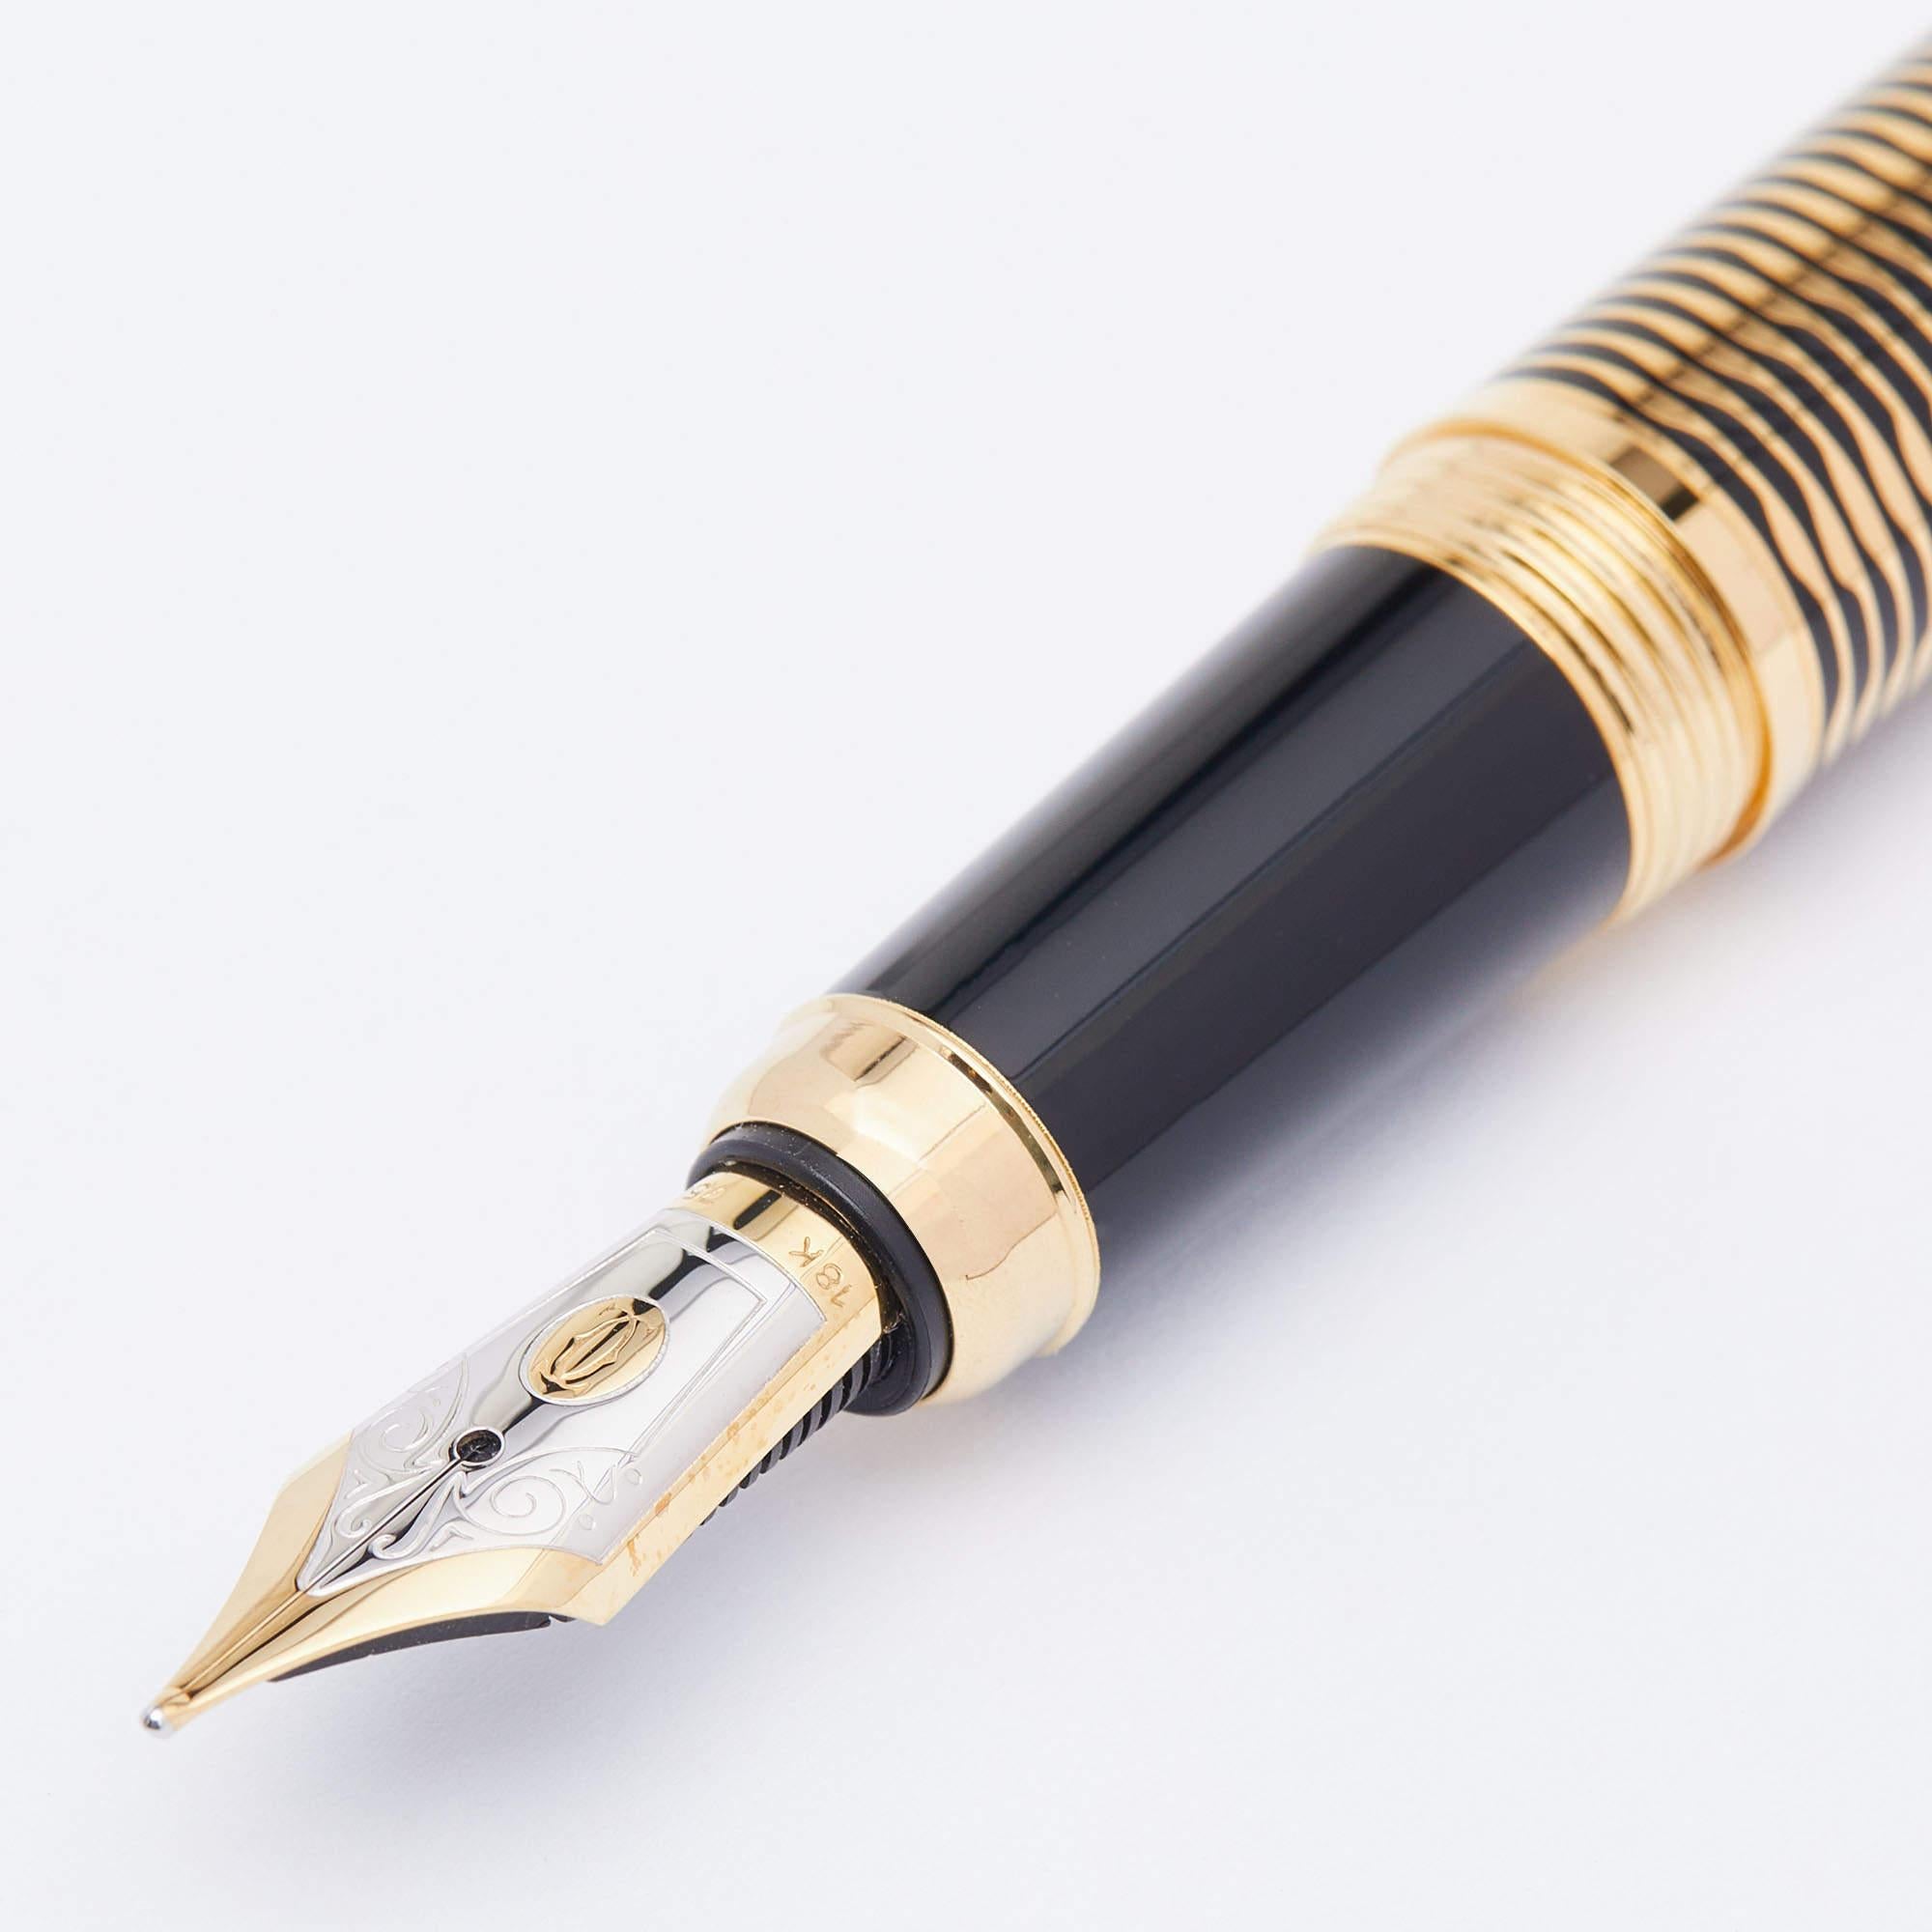 This Cartier fountain pen is from the Louis Cartier Limited Series and it is crafted from gold-plated metal. It has a pocket clip and signature engravings. The pen is a creation that defines quality craftsmanship and technical precision.

Includes: